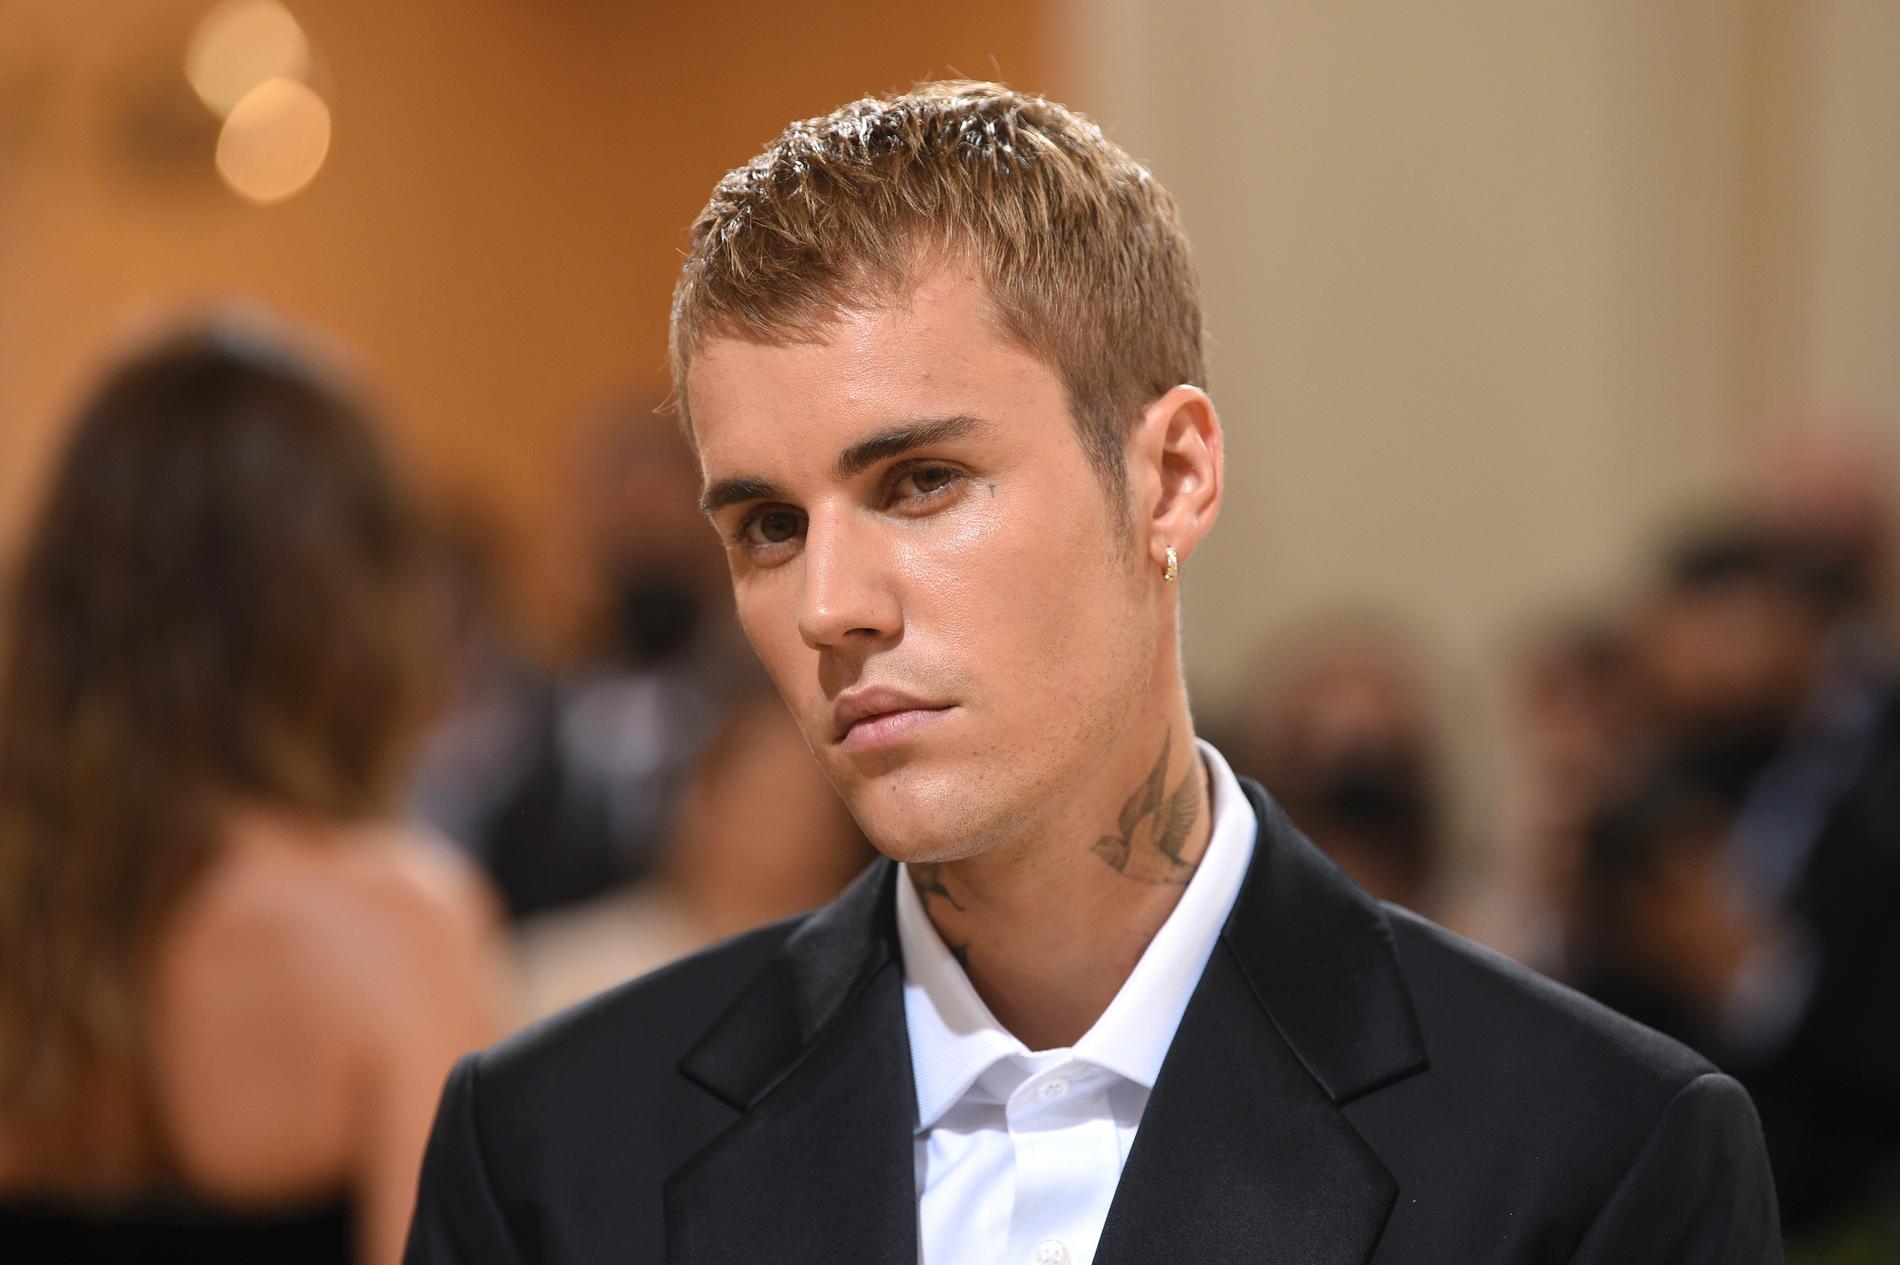 Justin Bieber has canceled the rest of his world tour